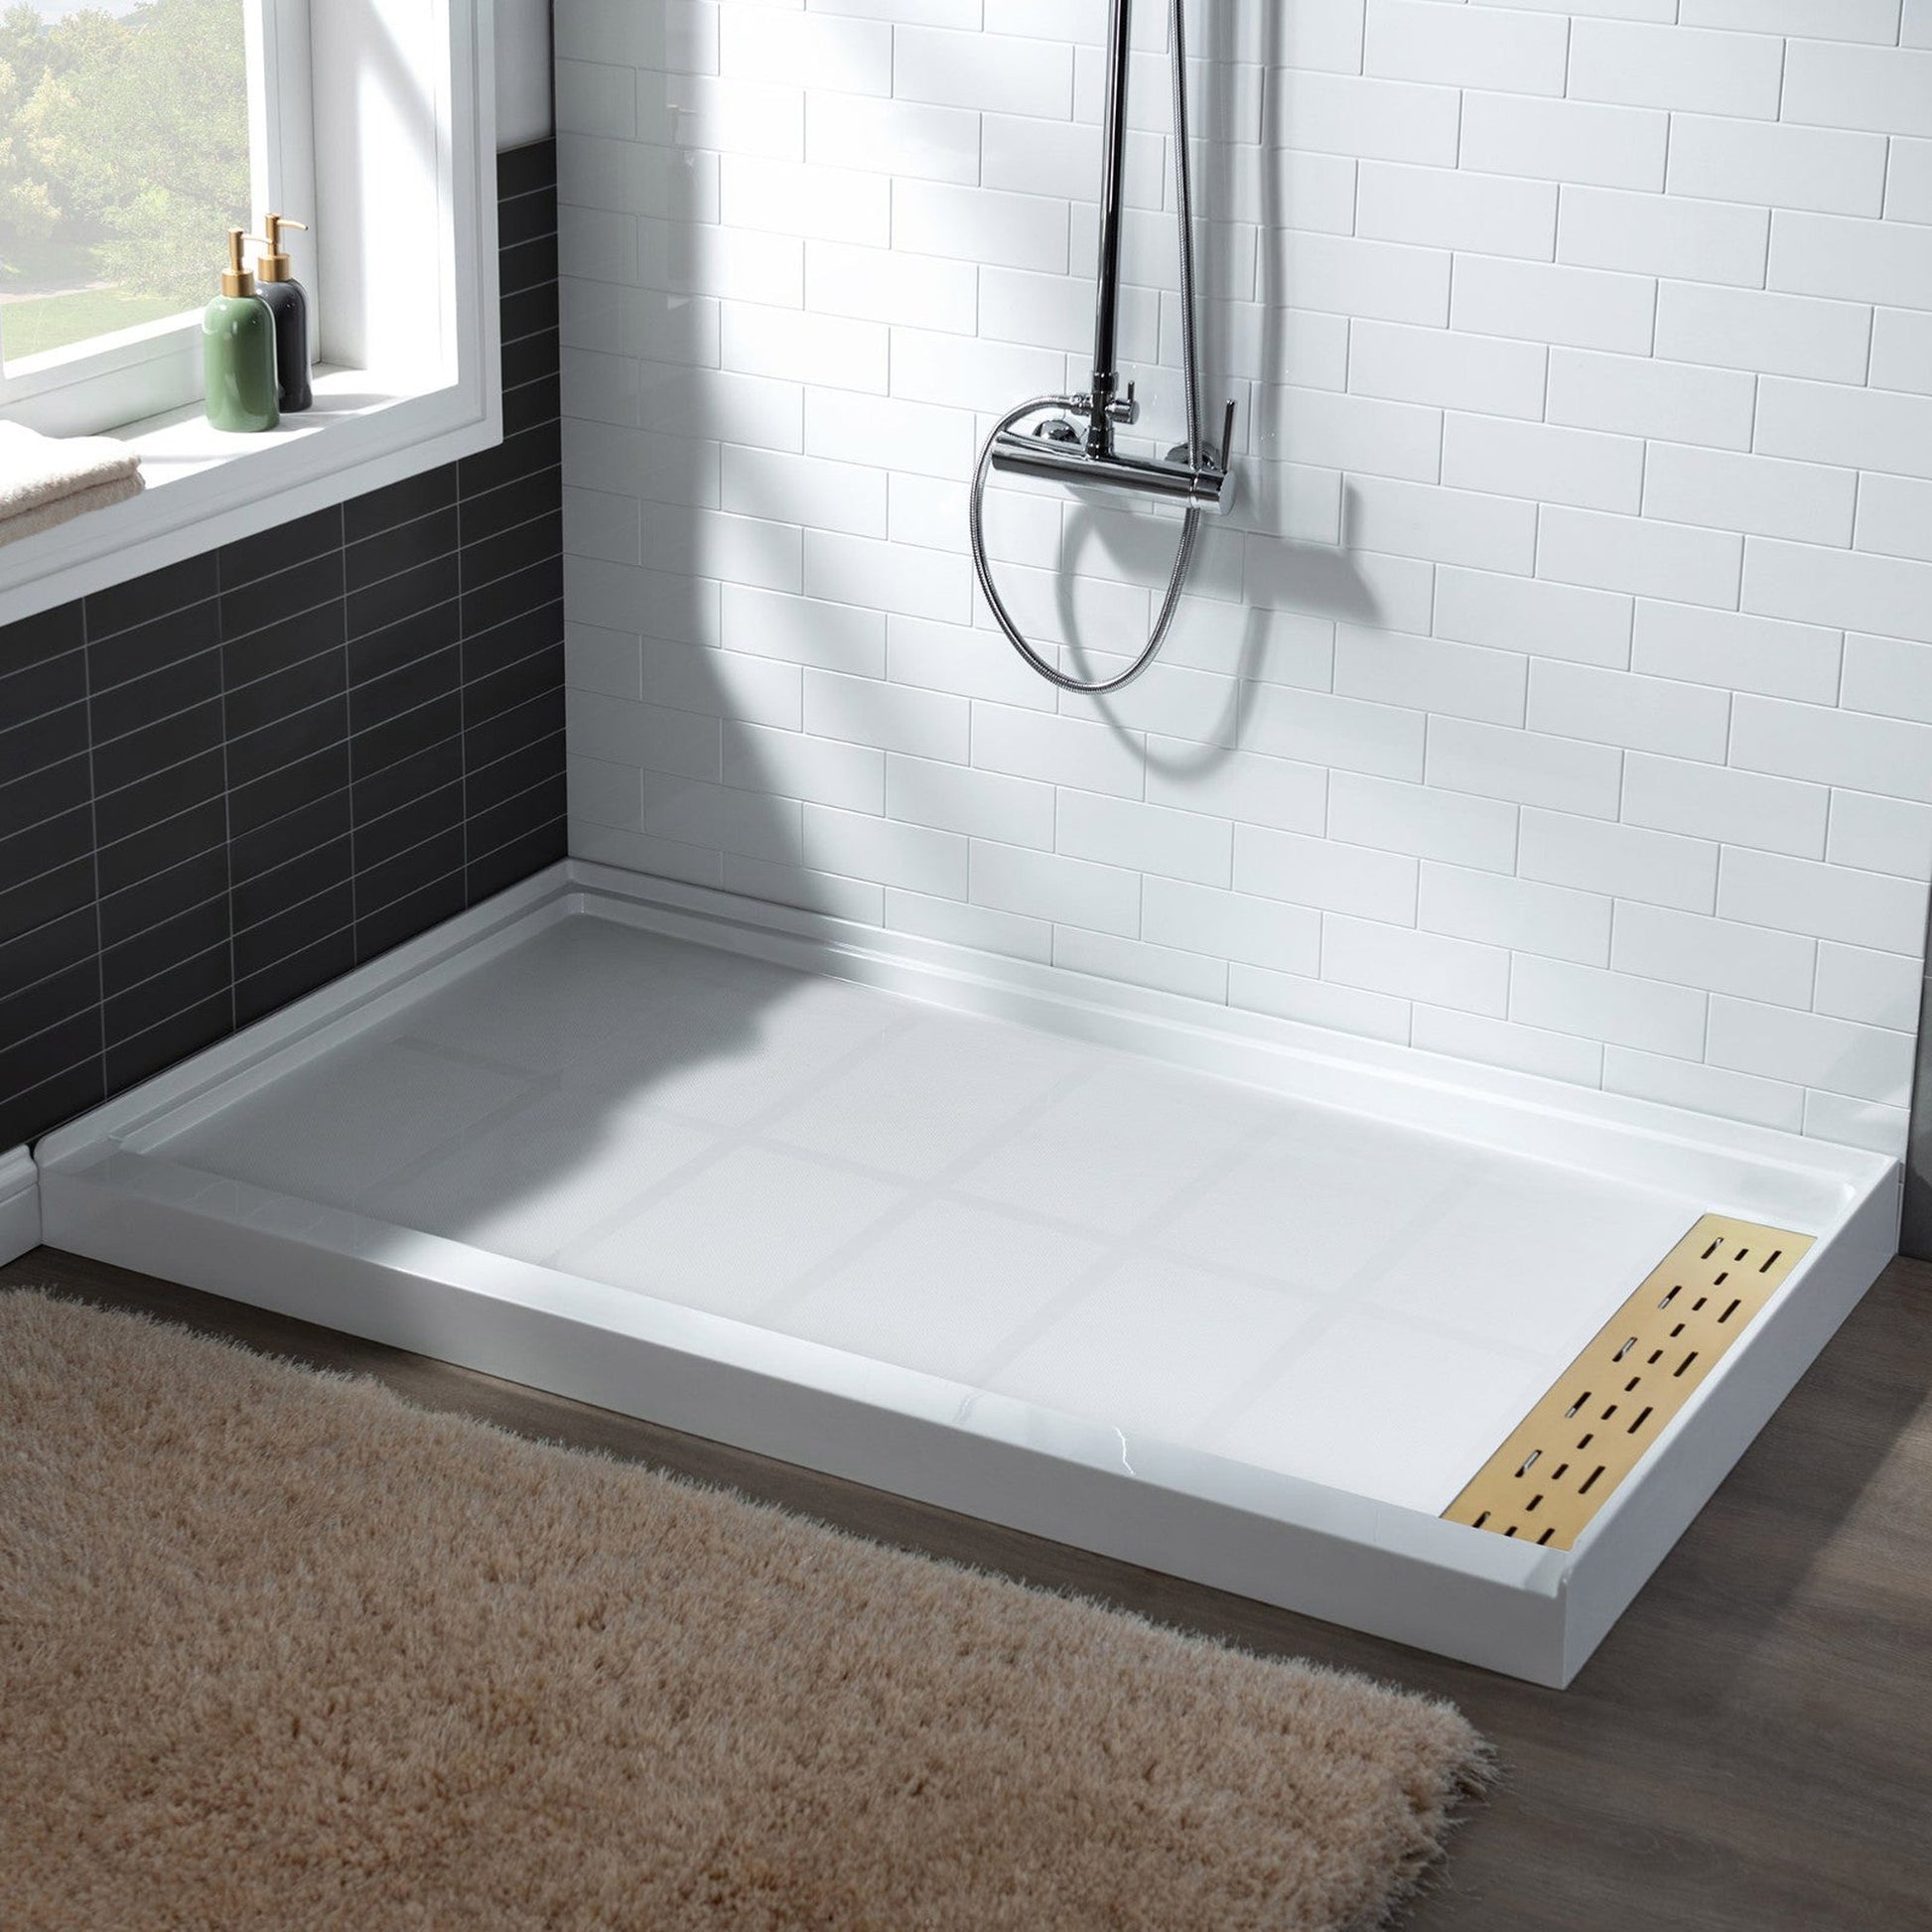 WoodBridge 60" x 34" White Solid Surface Shower Base Right Drain Location With Brushed Gold Trench Drain Cover